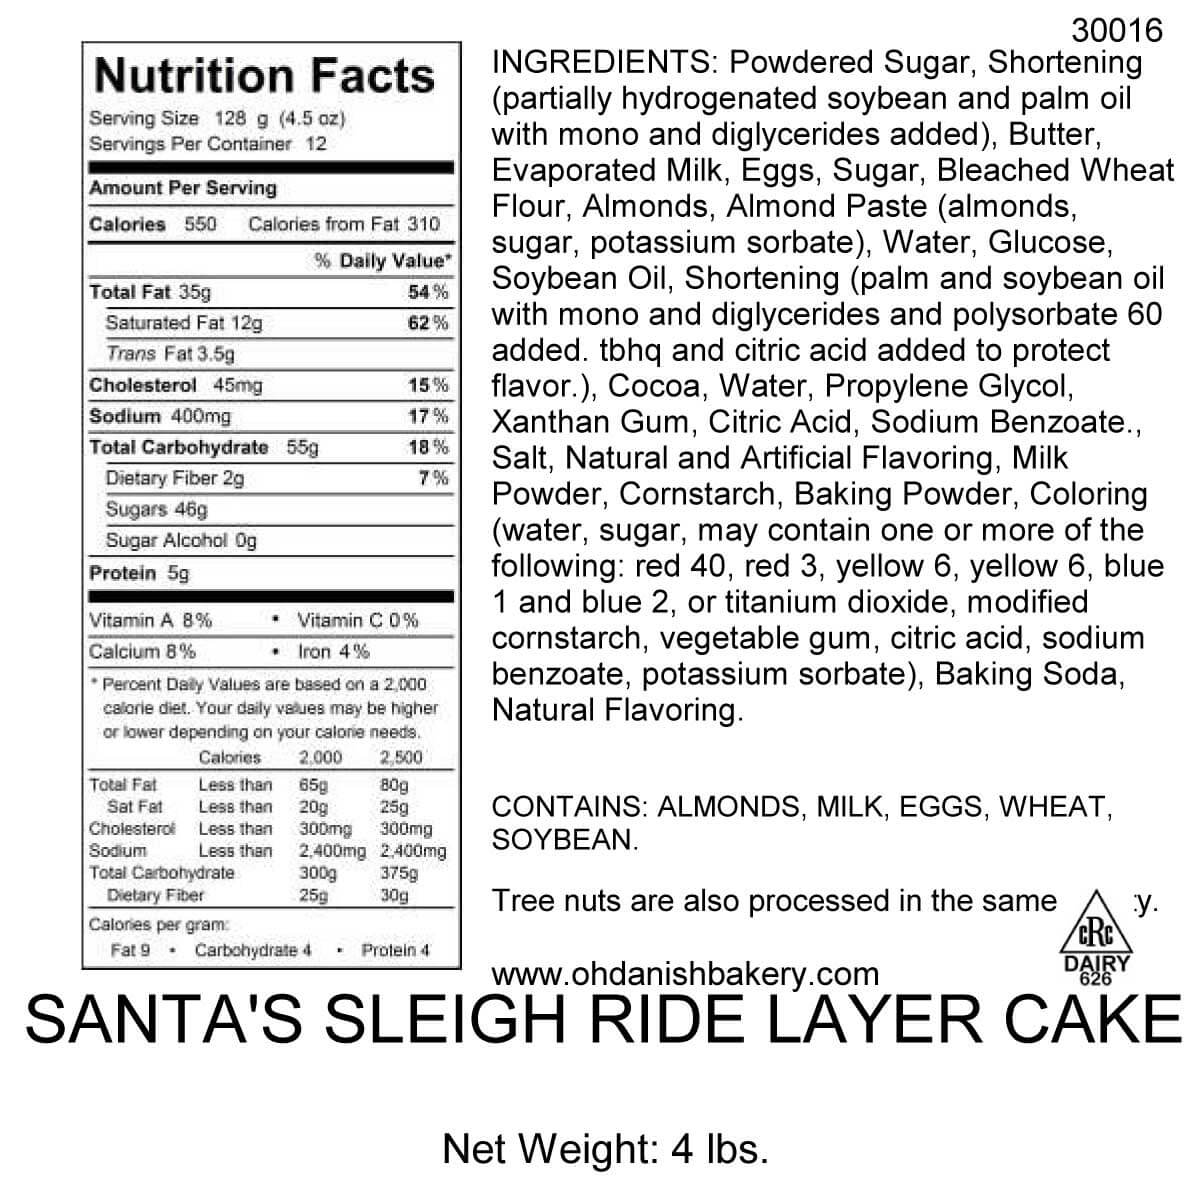 Nutritional Label for Santa's Sleigh Ride Layer Cake